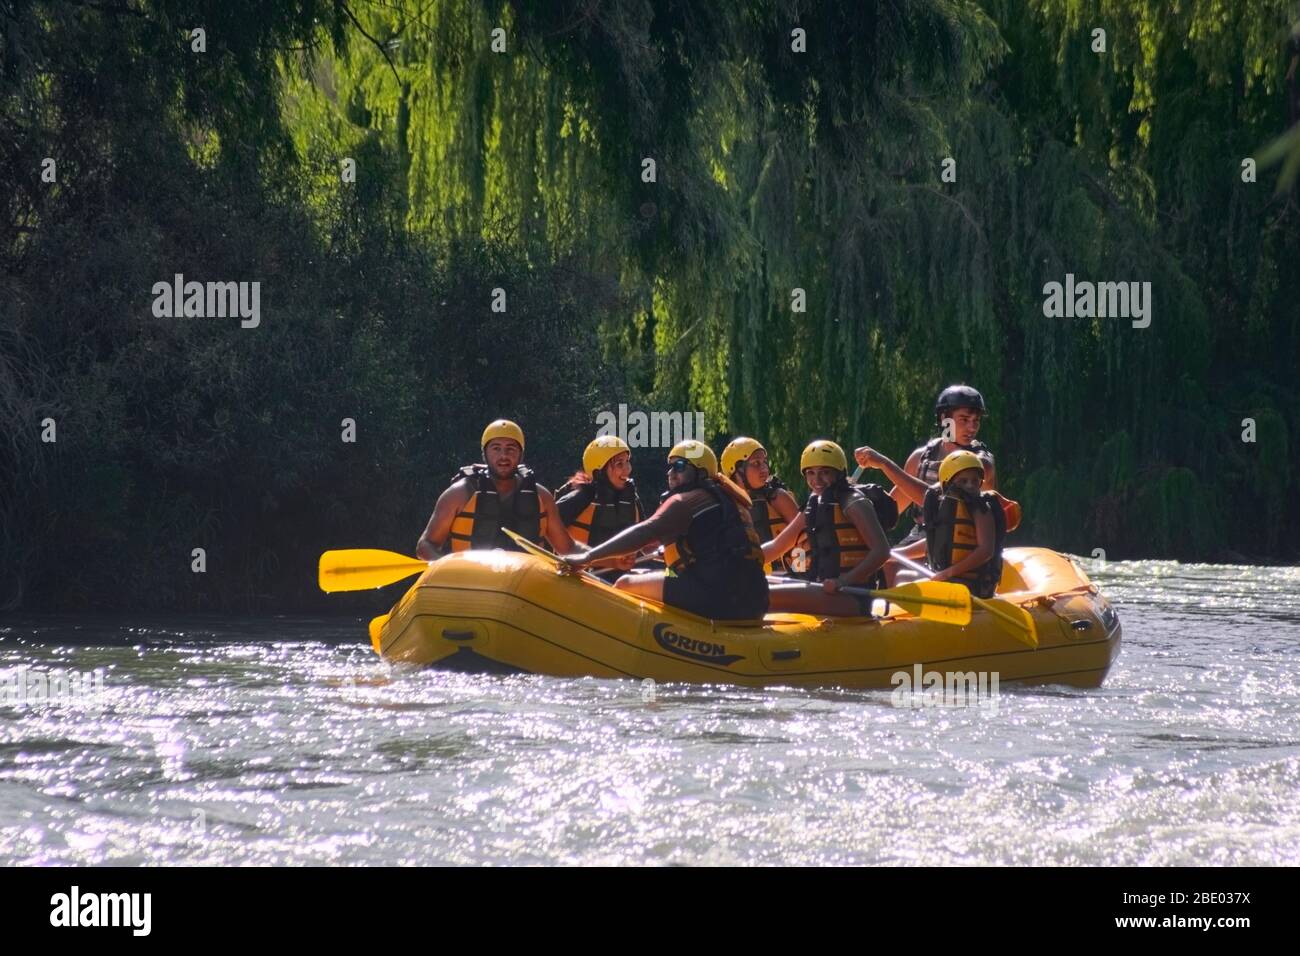 San Rafael, Mendoza - 2019-12-30: A group of people rafting on Atuel River, one of the best places in the province for adventure tourism. Stock Photo